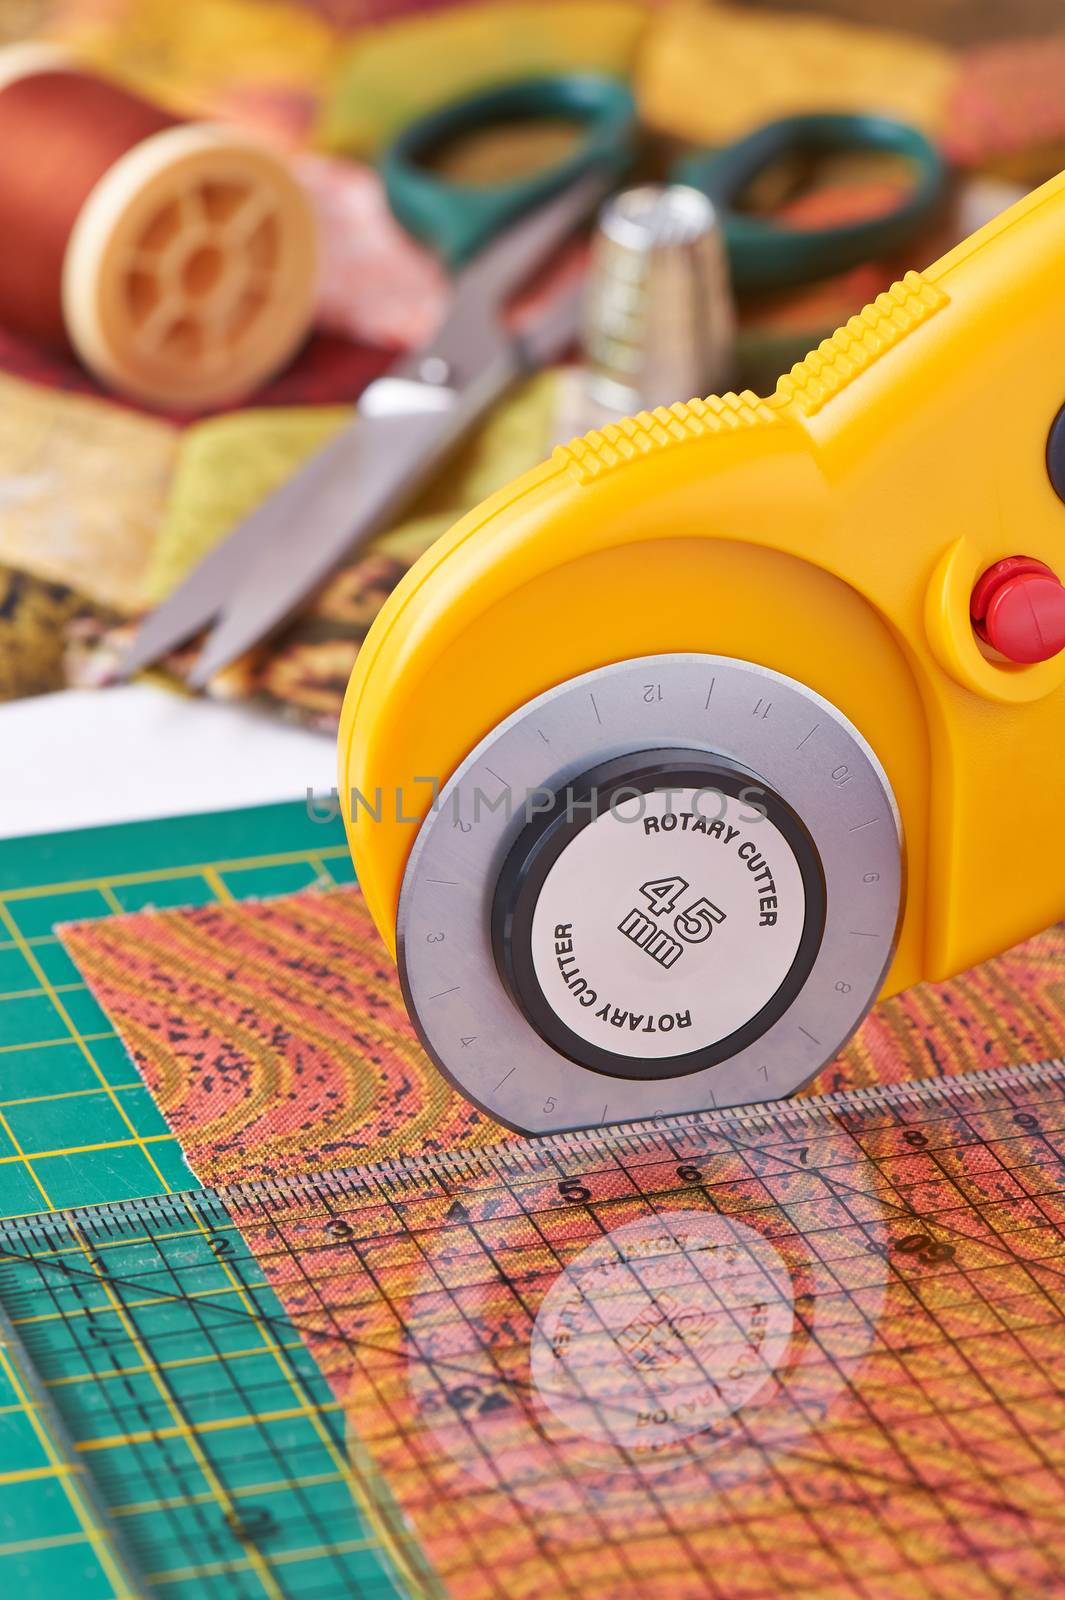 Rotary cutter cuts fabric on the a with a ruler